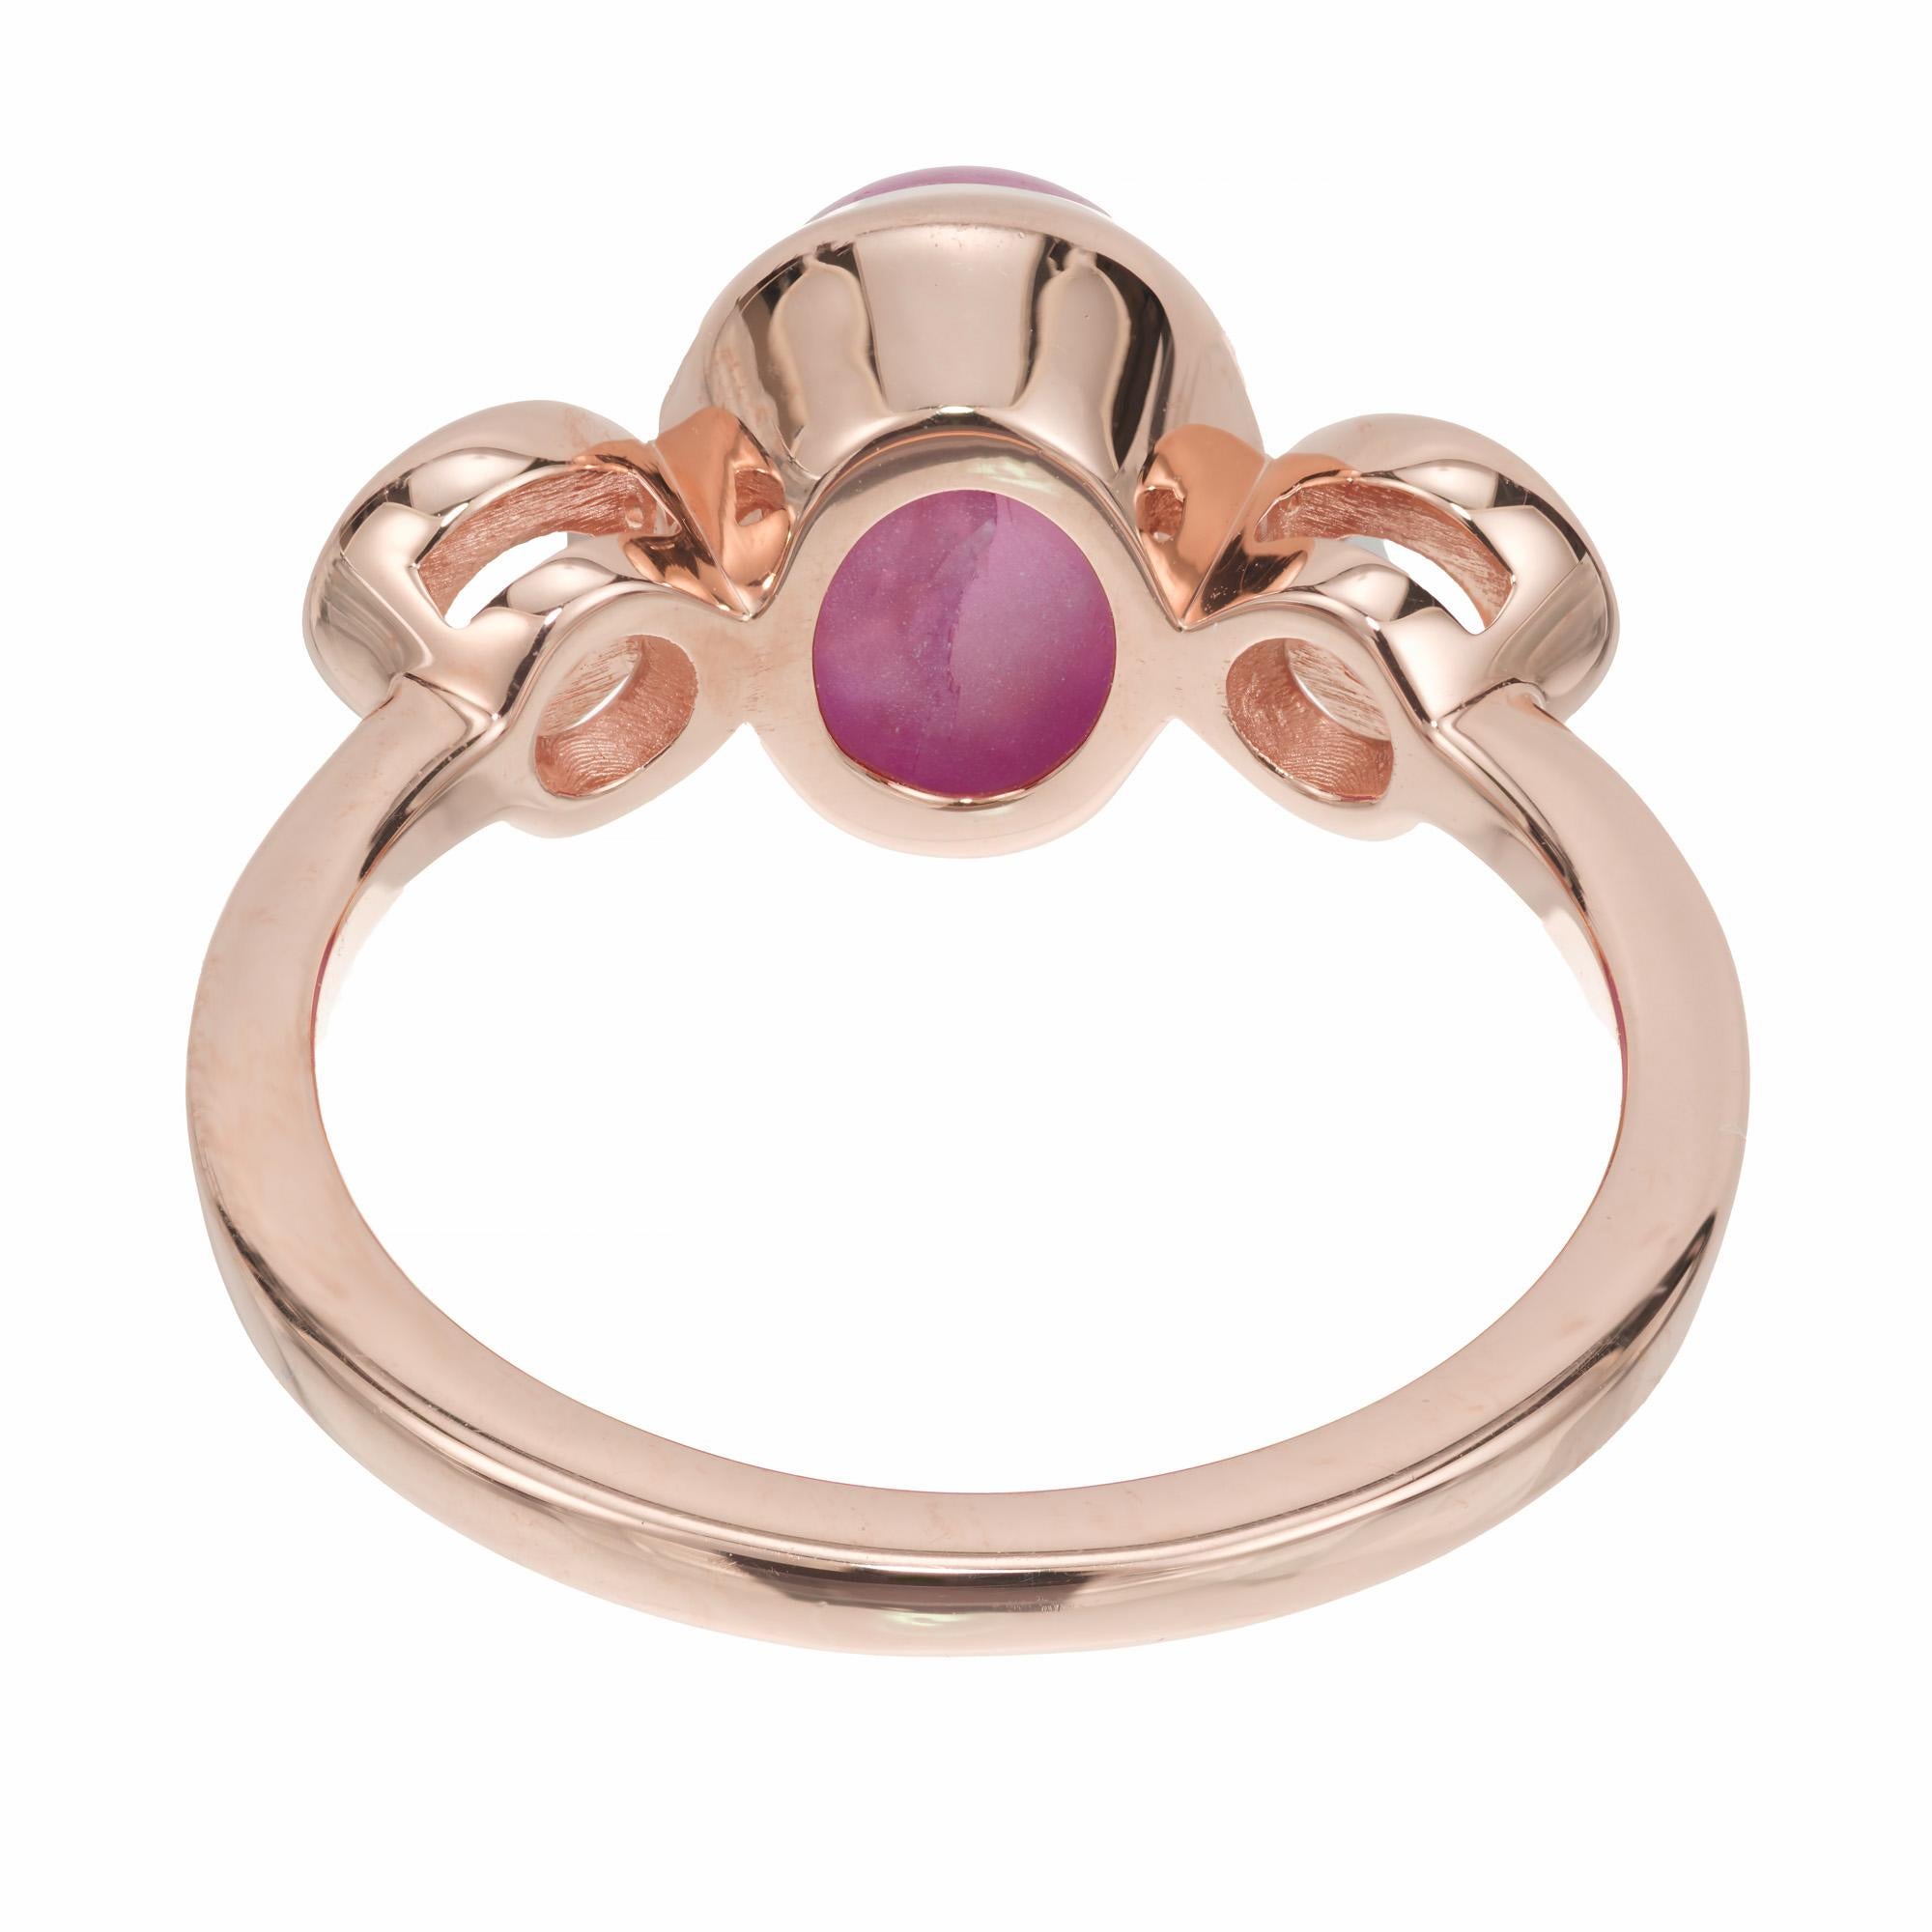 Peter Suchy GIA Certified 4.51 Star Sapphire Diamond Rose Gold Ring For Sale 1